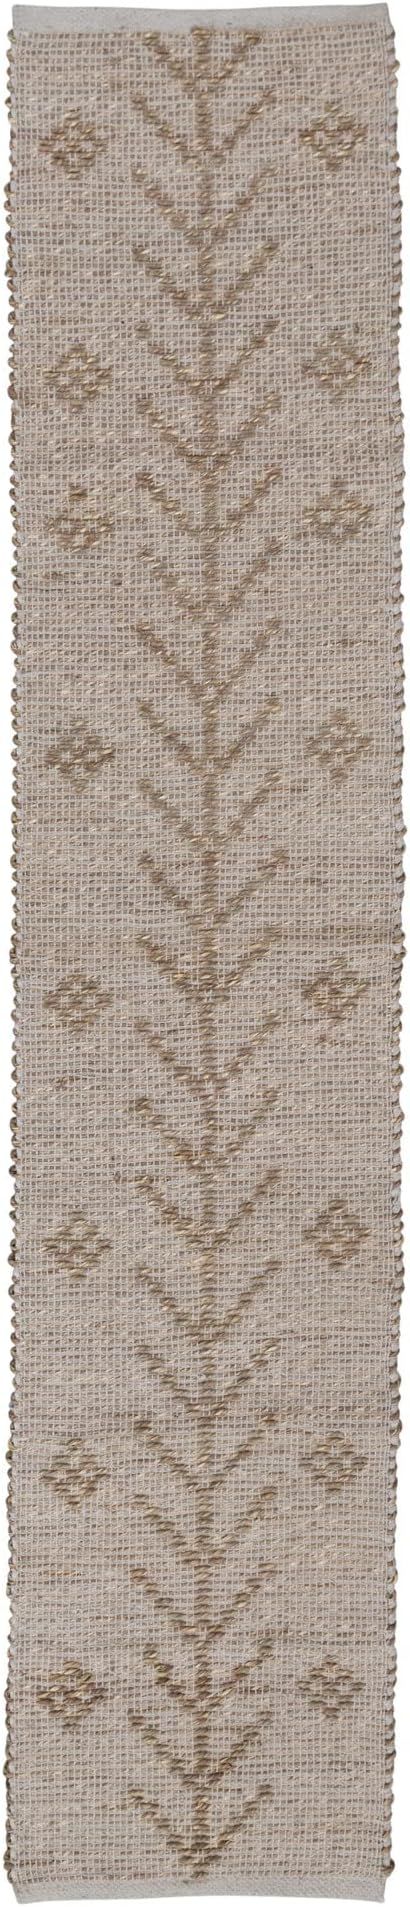 Creative Co-Op Two-Sided Handwoven Seagrass and Cotton Table Runners, 72"L x 14"W x 0"H, Natural | Amazon (US)